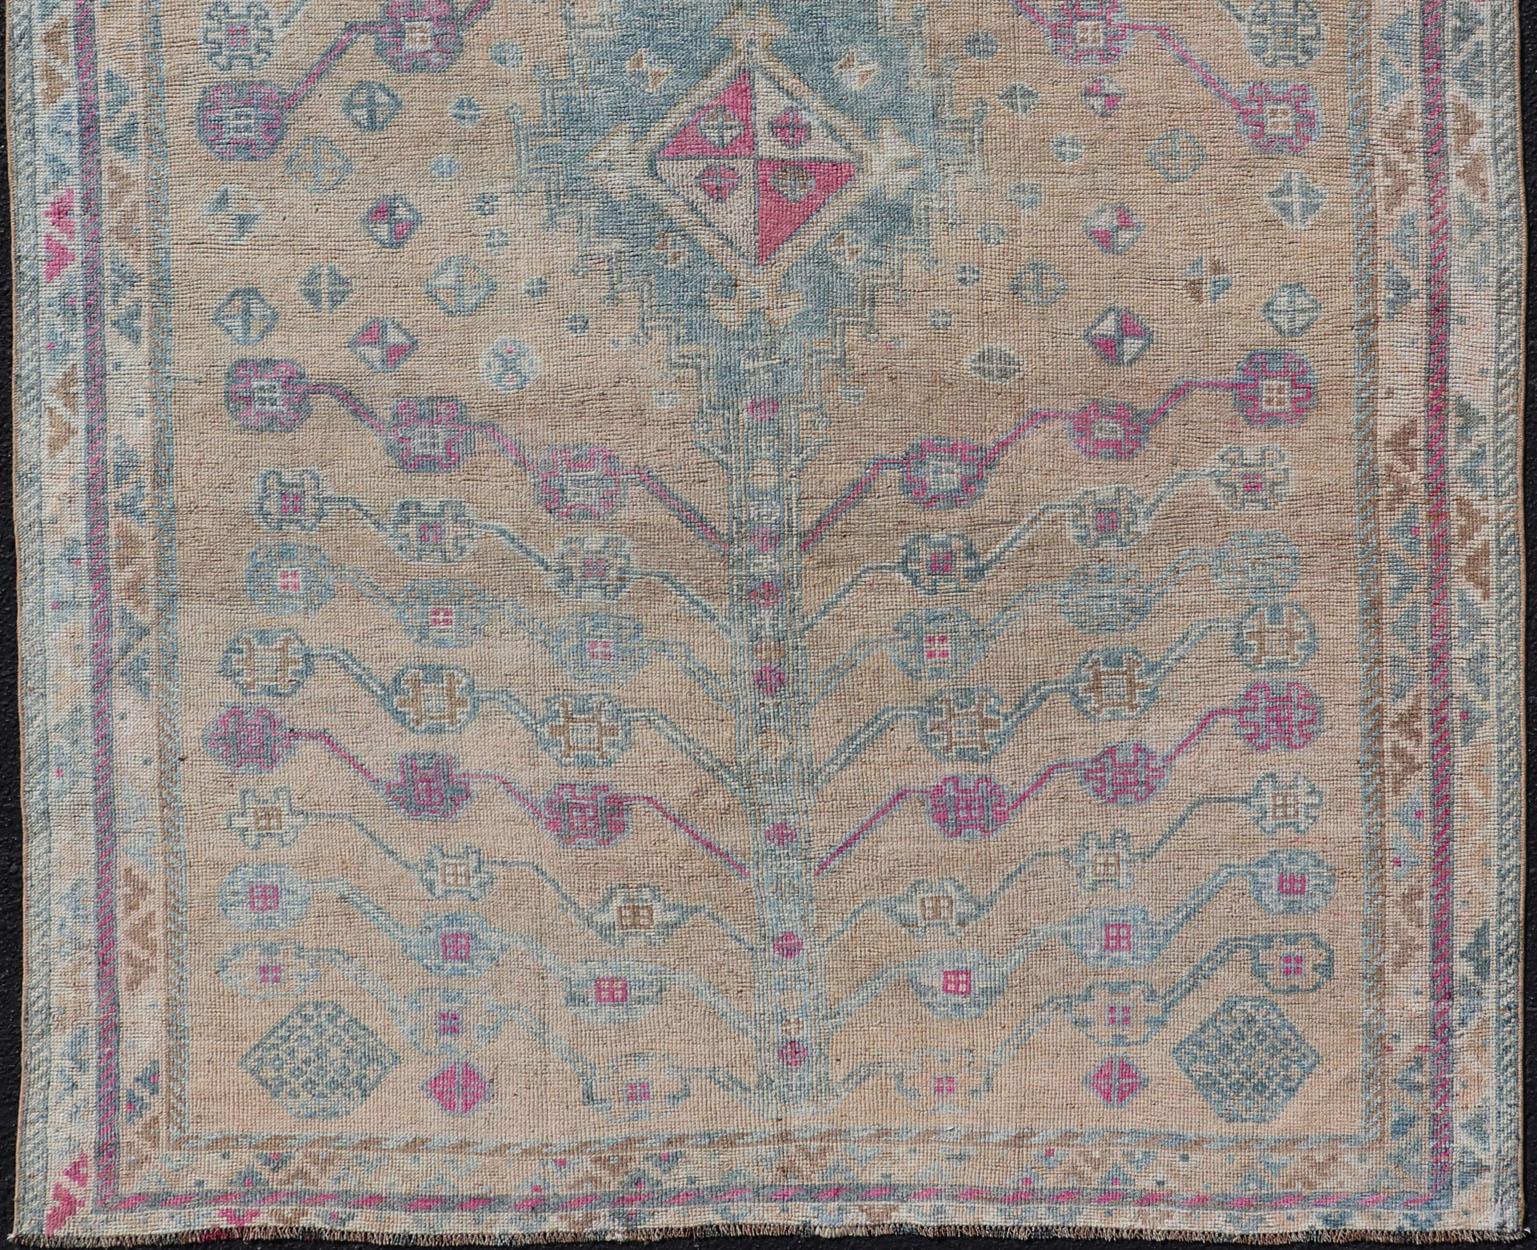 Vintage Persian Shiraz with Tribal Design in Soft Yellow, Pink, and Blue Gray 1